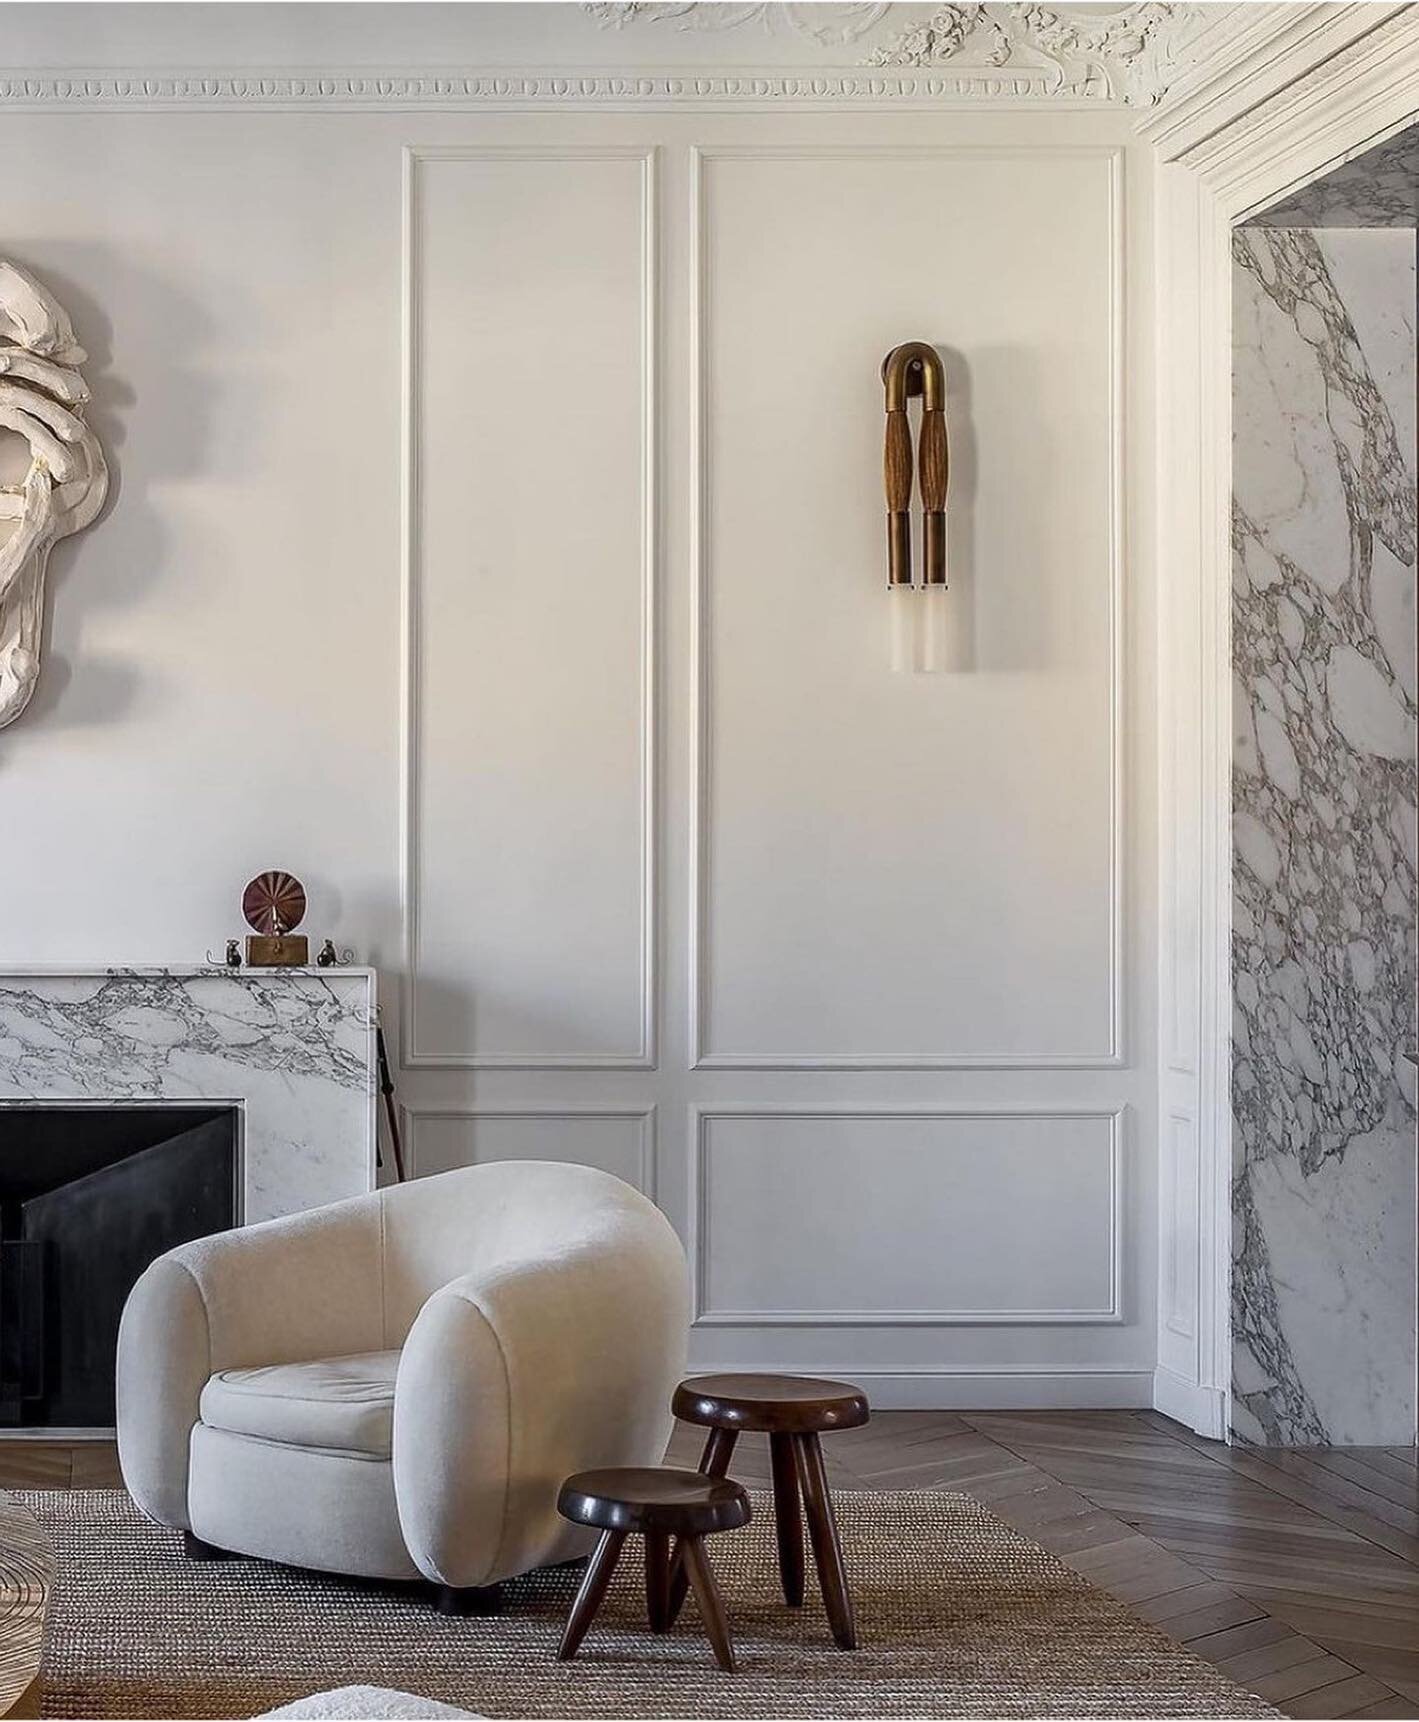 INSPIRATION \\ Beautiful Monday&hellip;for a marble wrapped cased opening!!! Details!!! 😍
Stunning Paris apartment with typically French elegance 🖤 amazing style 
By @atelierdaaa via @birgitotteinterior

.
📸 @cafeine 

.
.
.
.
.
#interiordesign #i